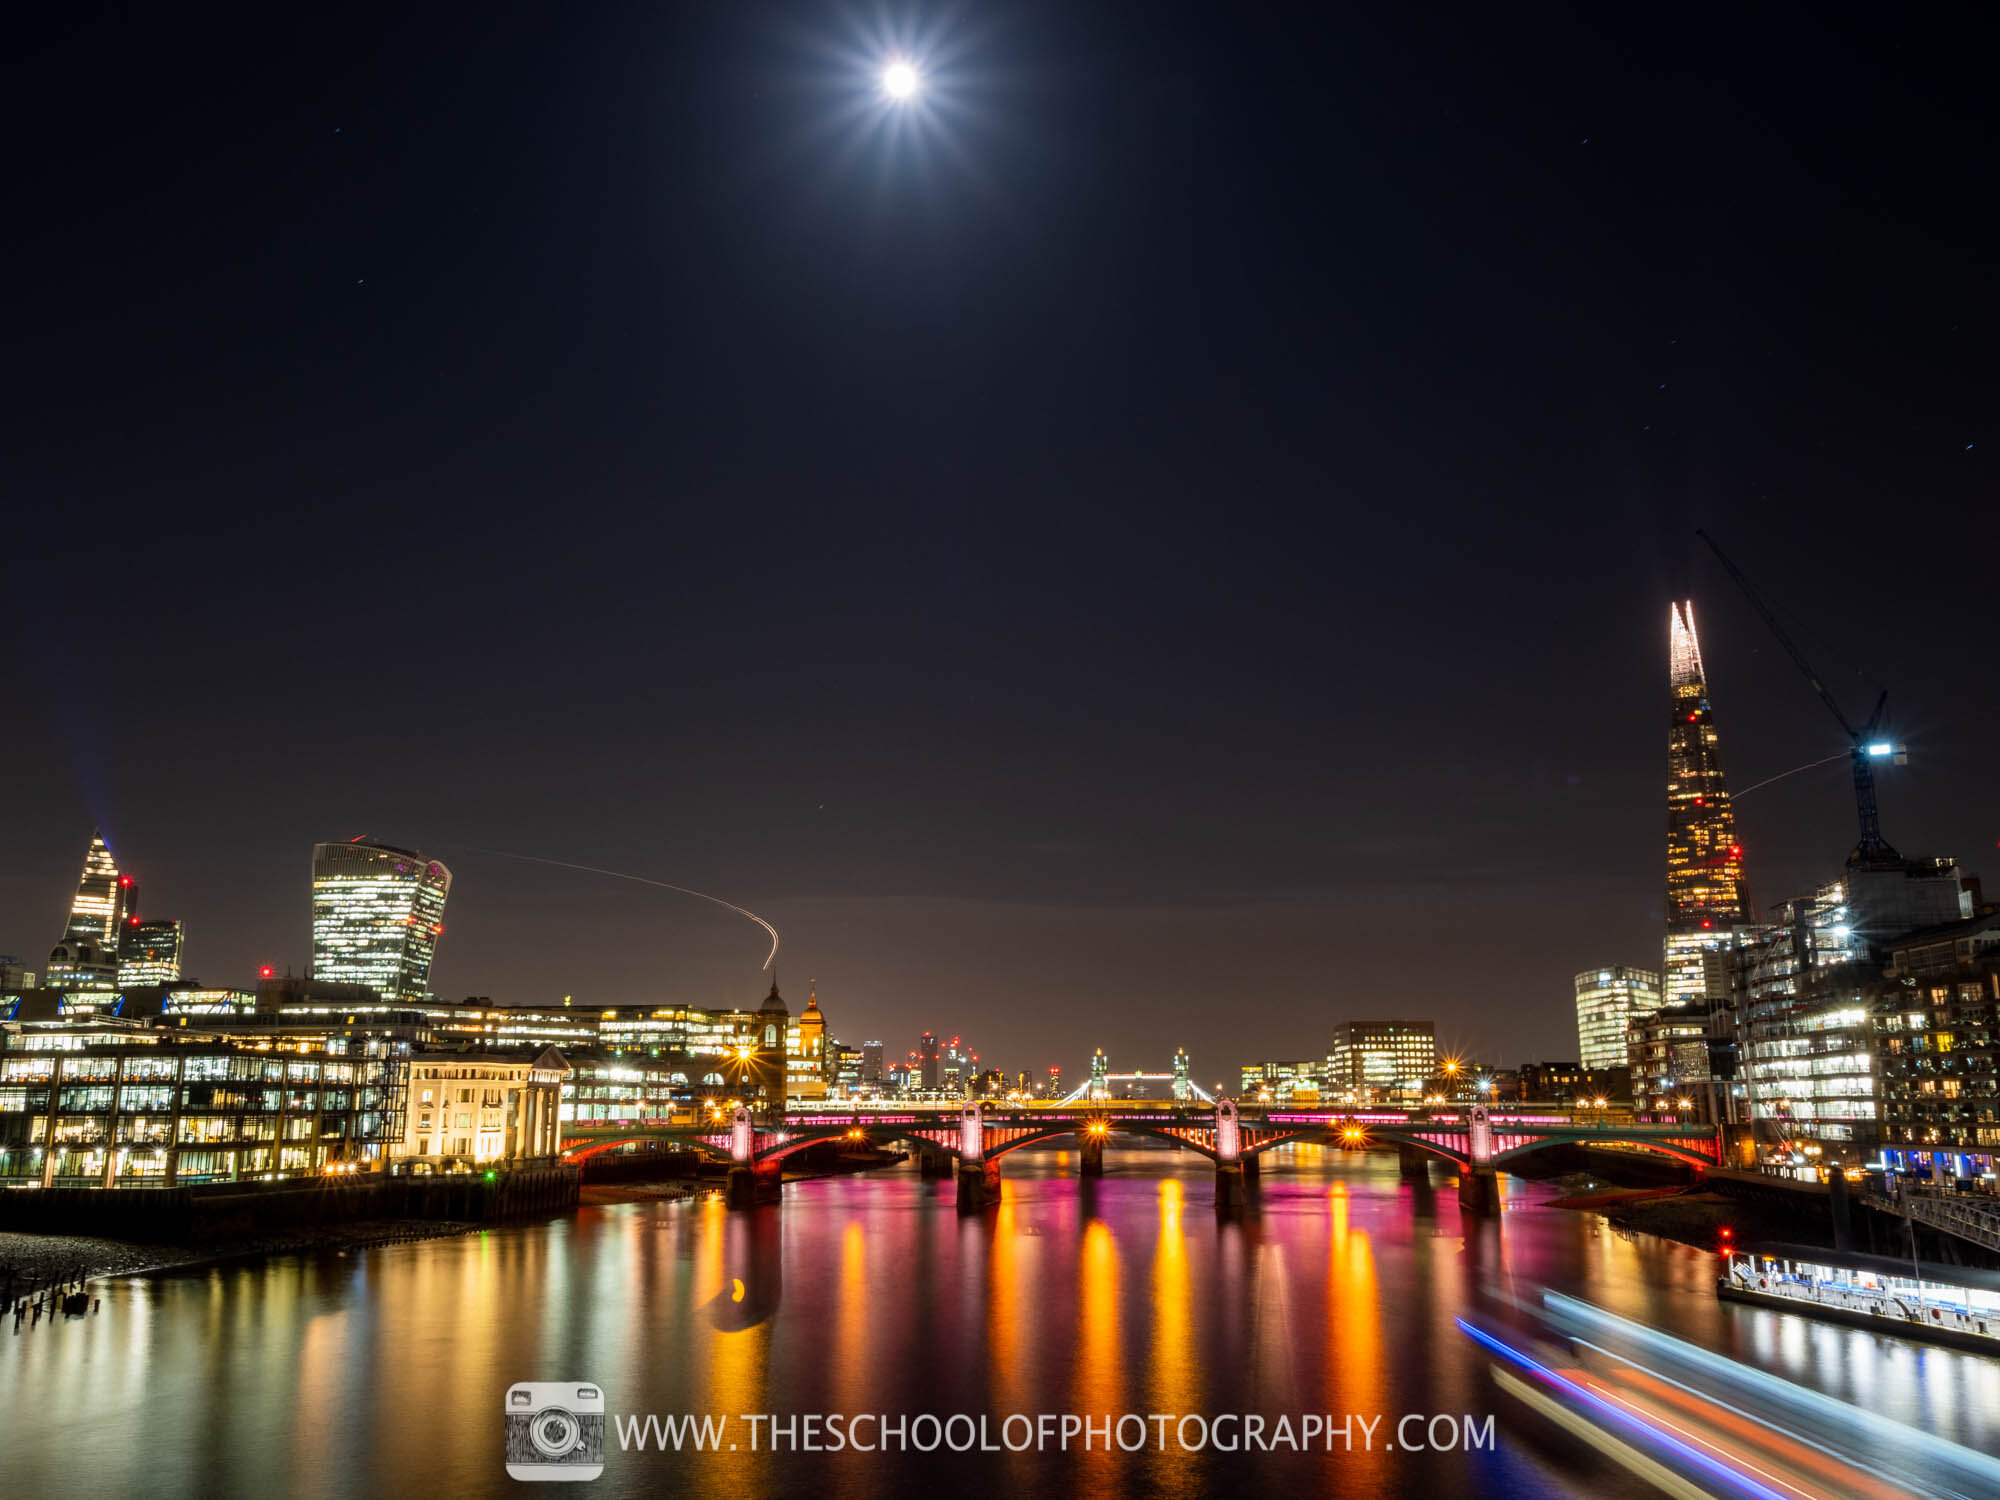 Settings For Night Photography, Nighttime Landscape Photography Settings